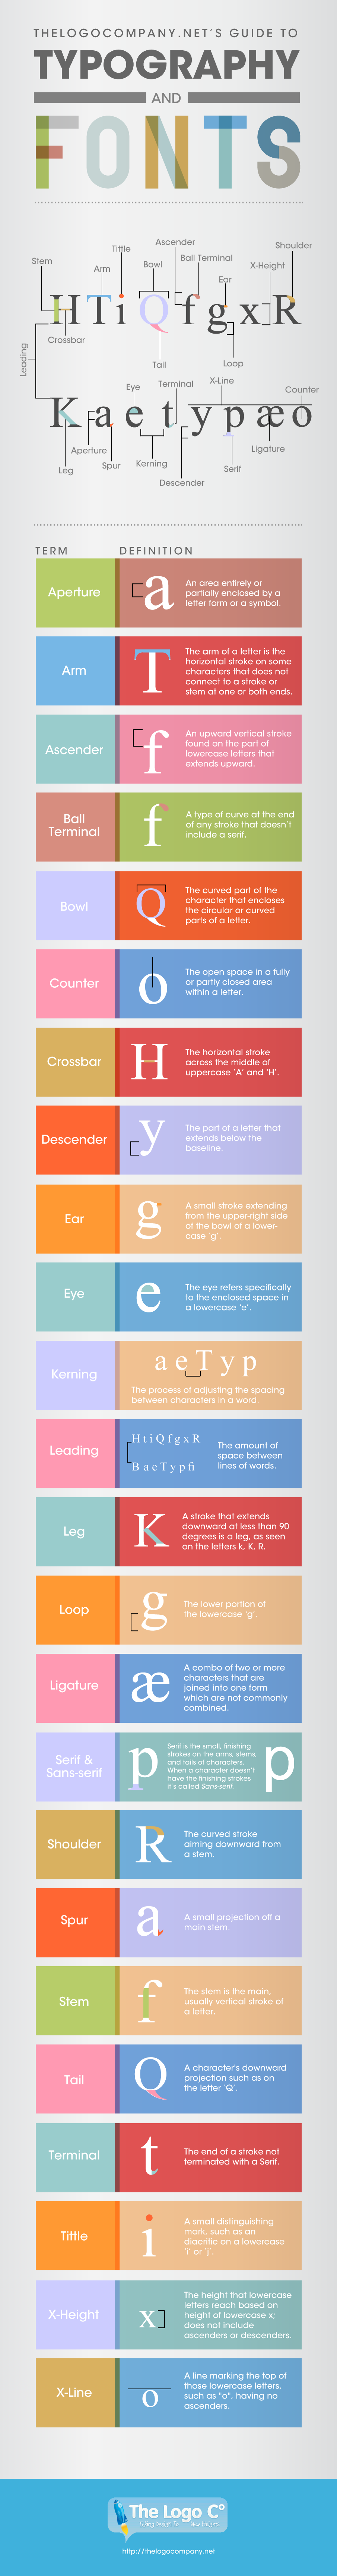 This clever graphic decodes the secret of Typography and Font Deconstruction. It's really easy to understand